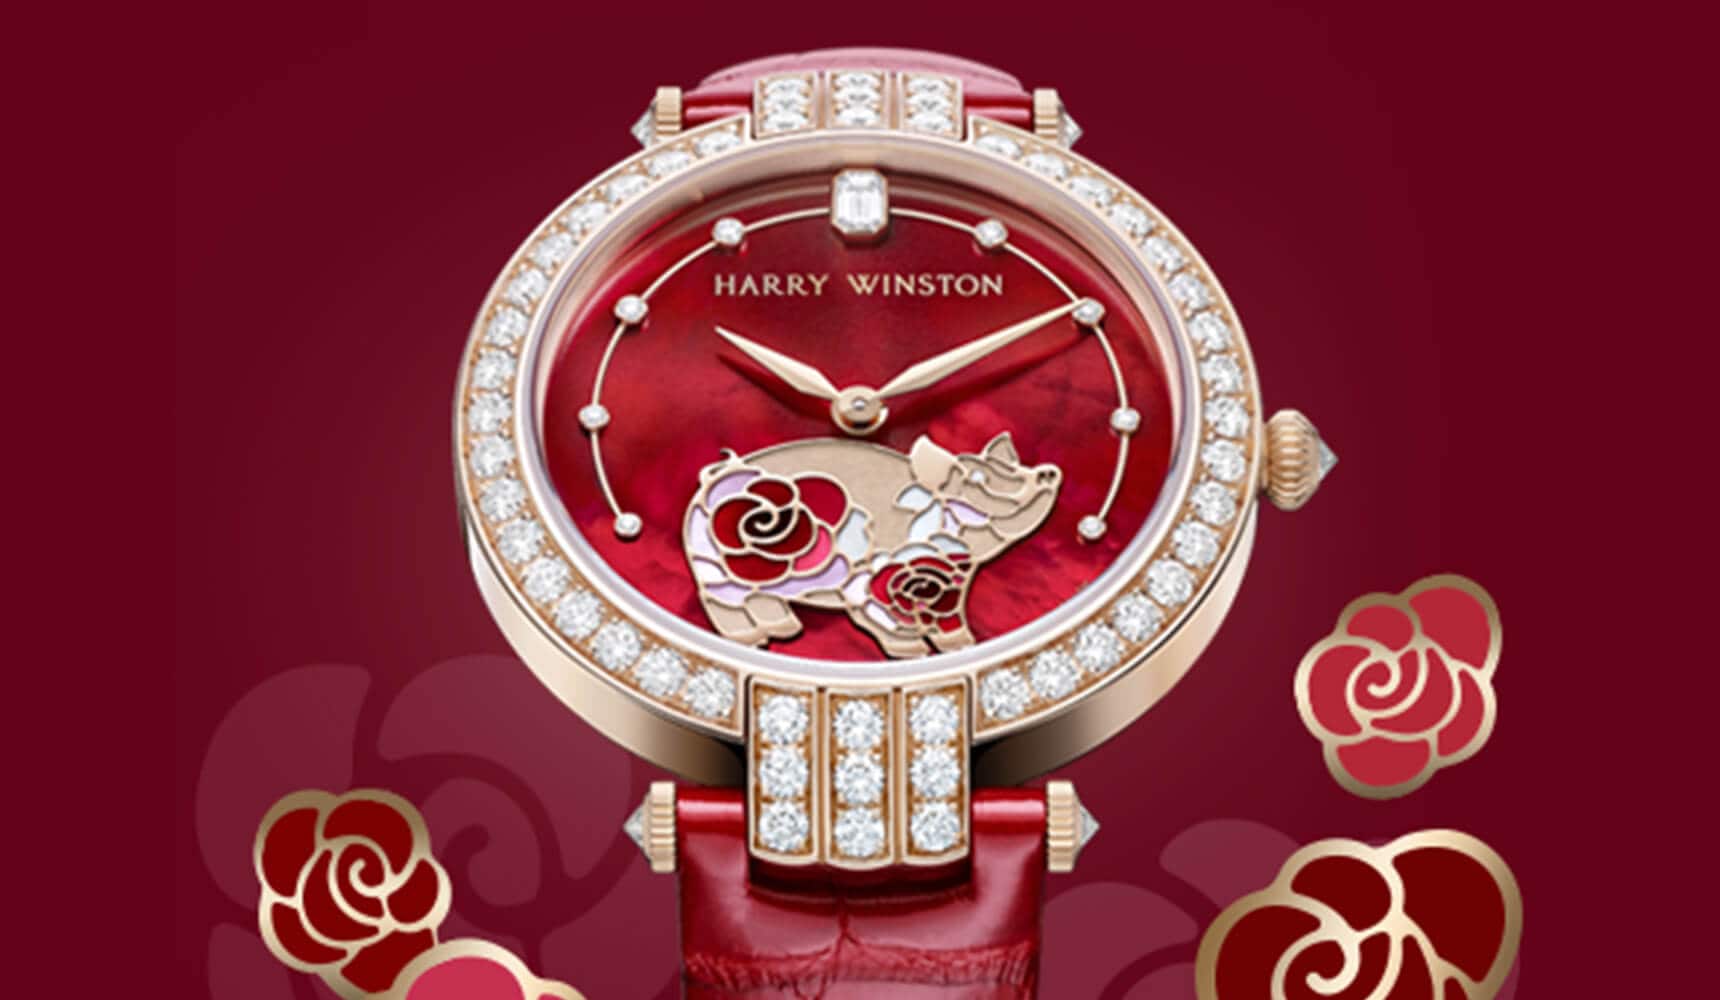 Harry Winston celebrates the Year of the Pig